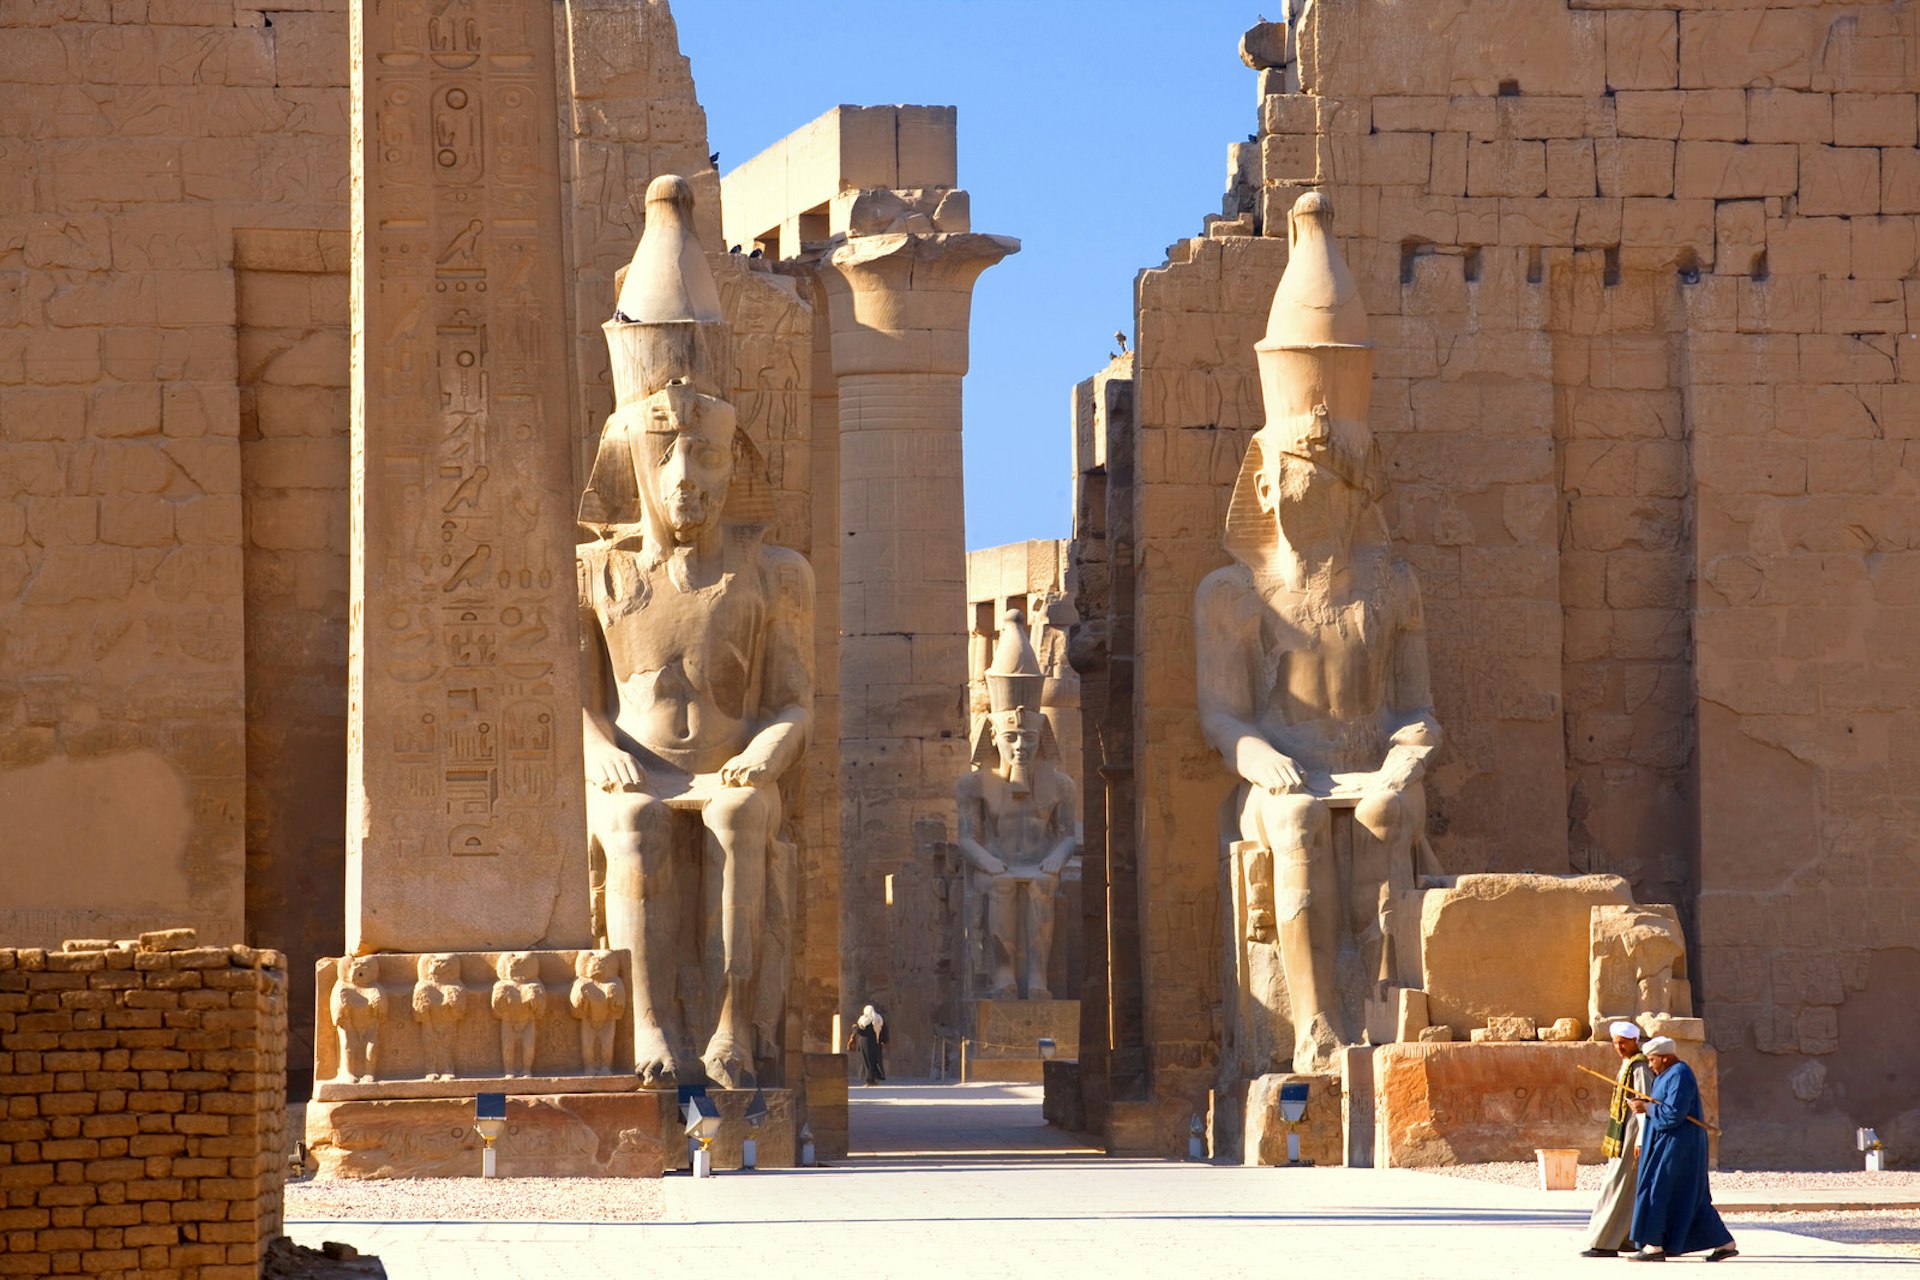 Colossal statues of Ramses II at Luxor Temple, Egypt. Image by Visions Of Our Land / Getty Images